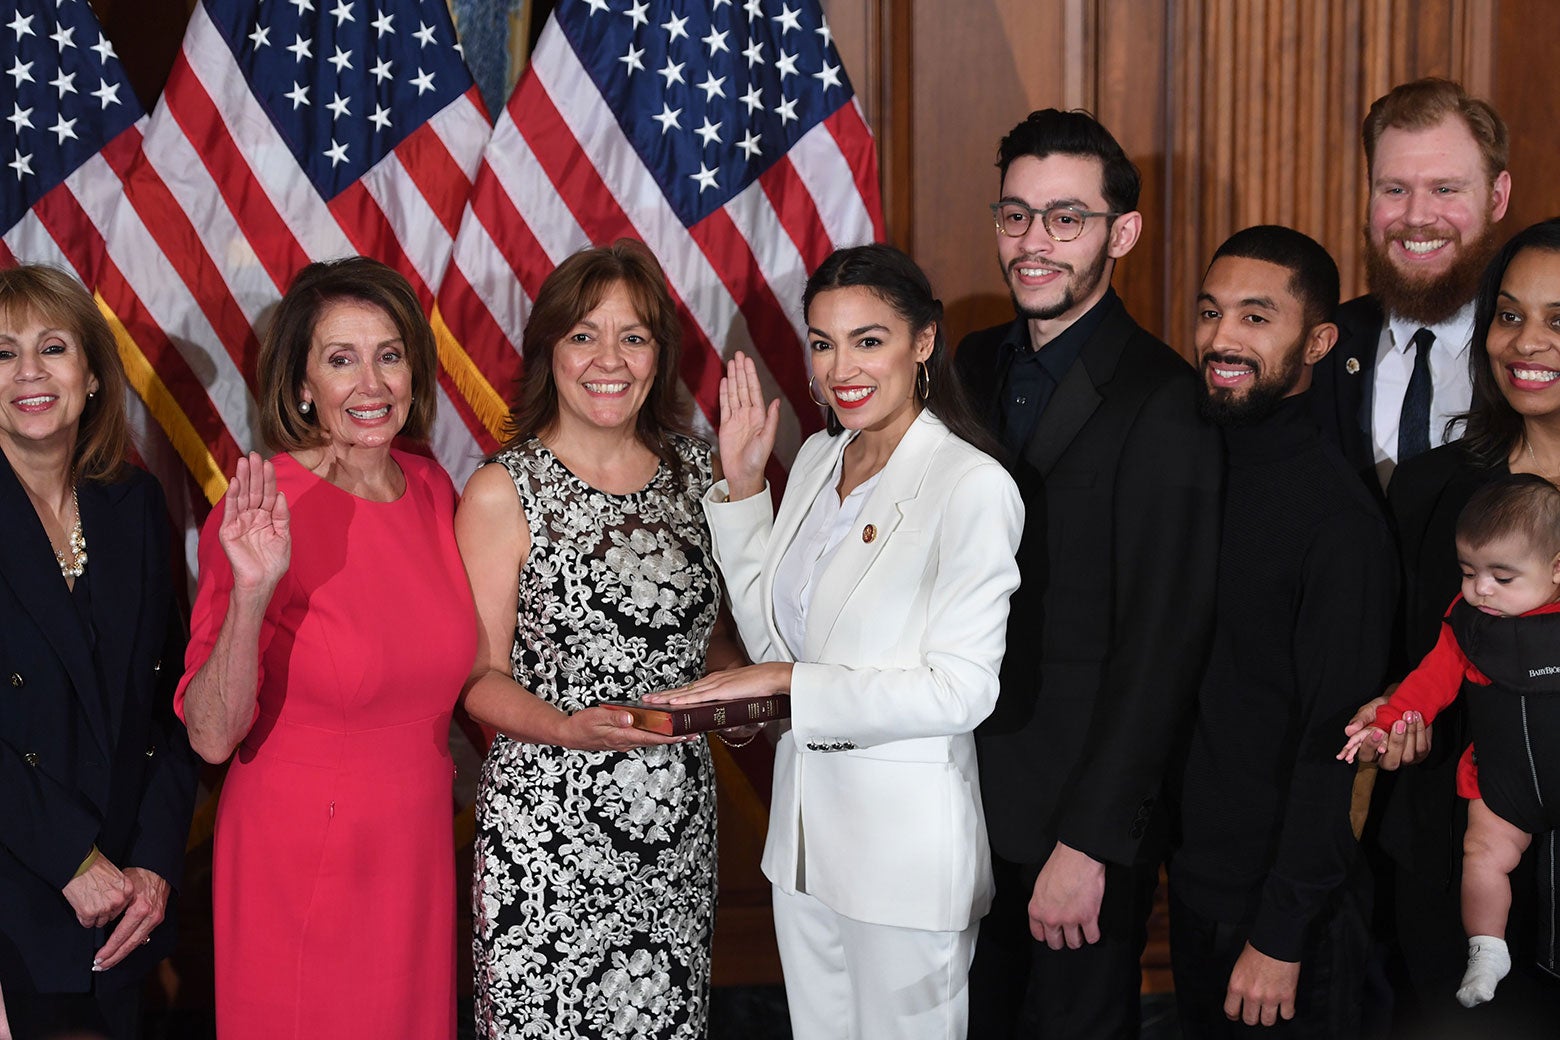 Speaker of the House Nancy Pelosi performs a ceremonial swearing-in for New York Rep. Alexandria Ocasio-Cortez.